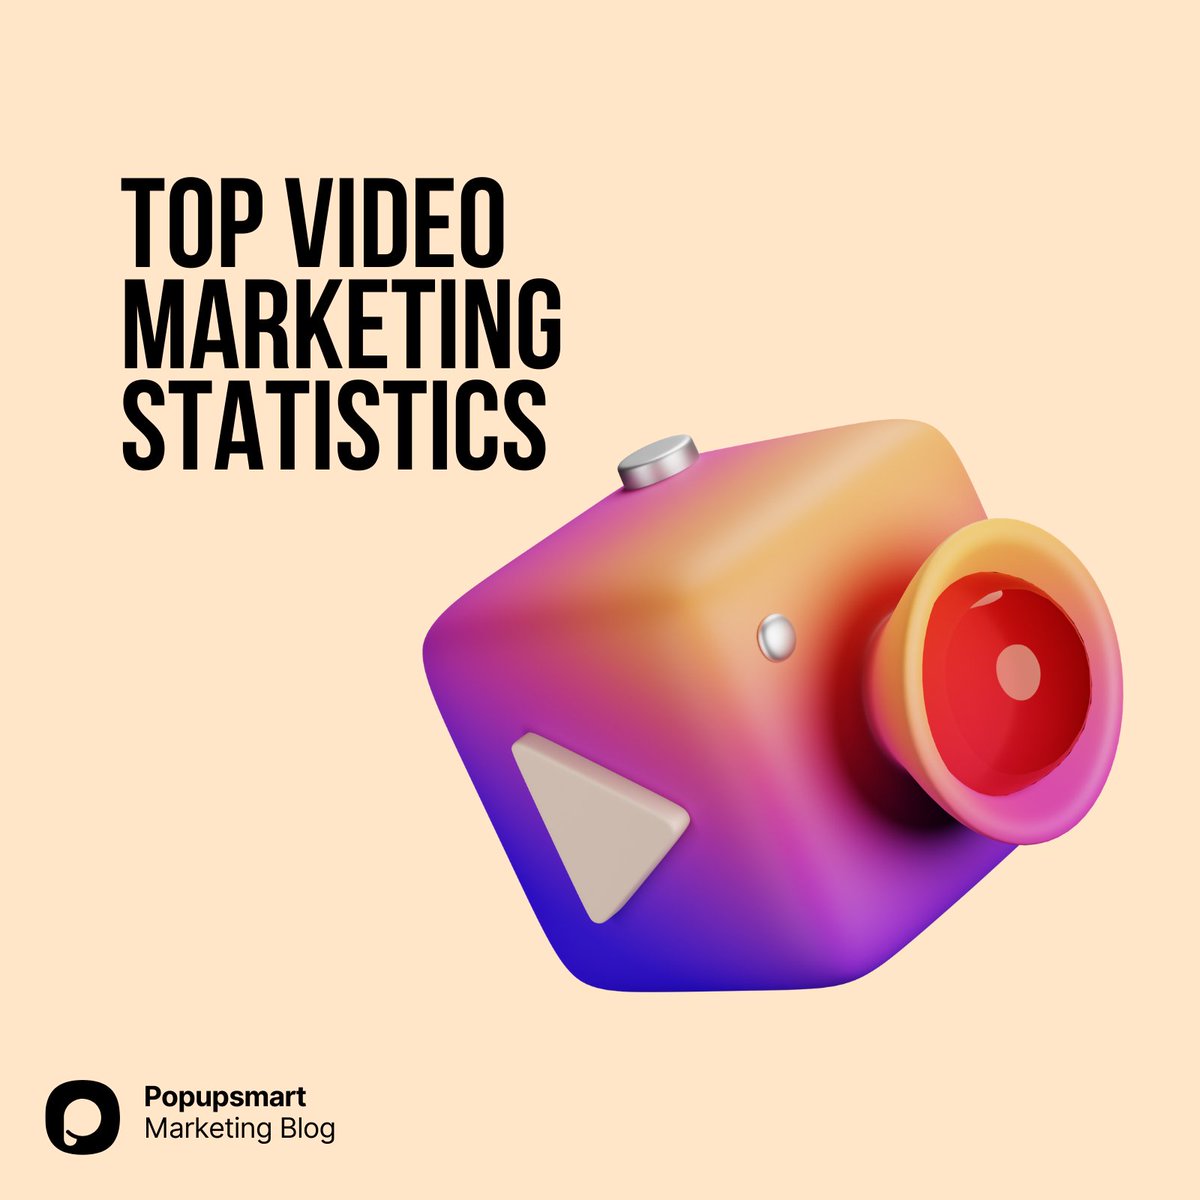 Video marketing has come a long way & shows no signs of slowing down. 📹

Let's explore the latest video marketing statistics together! 📊

#videomarketing